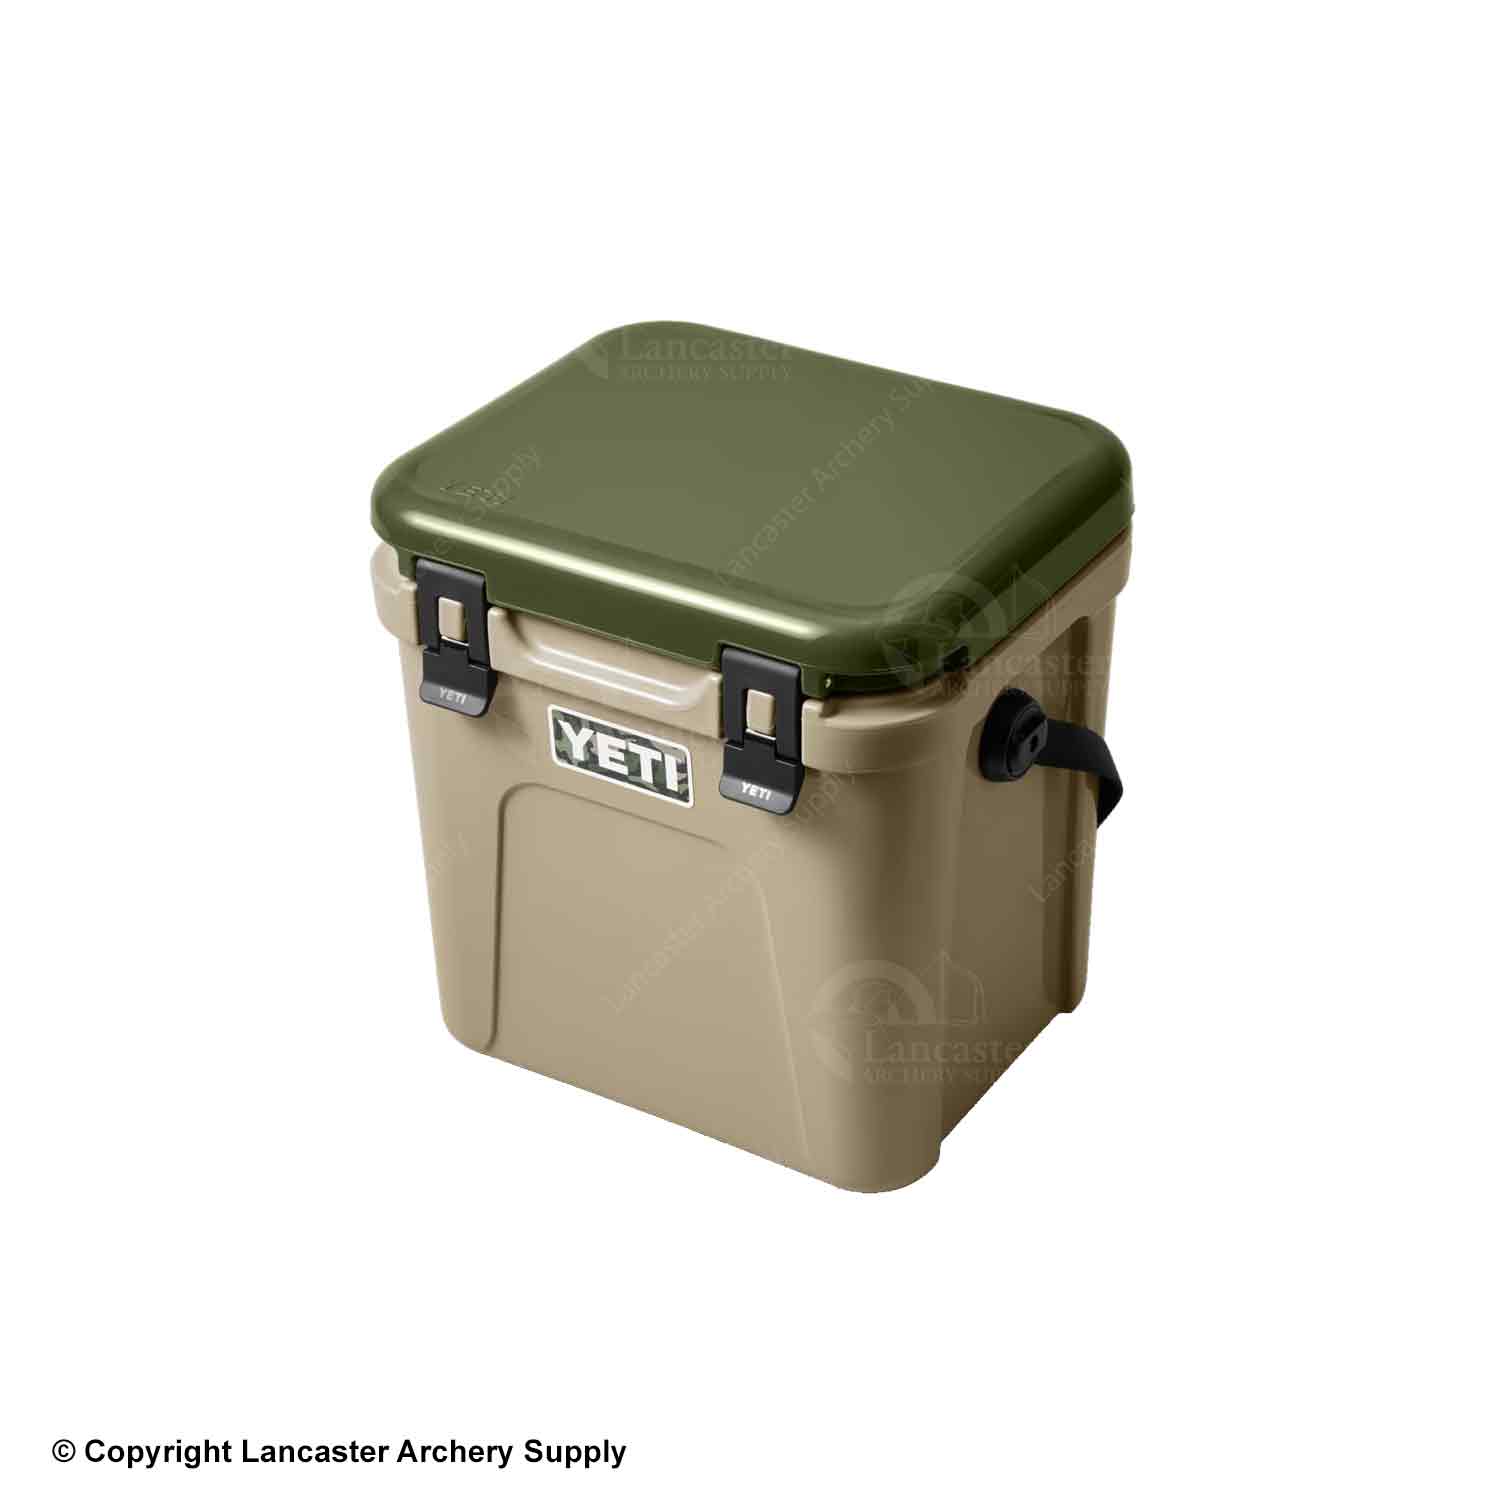 The Best From Our Tests: A Review of YETI's Roadie 24 Cooler